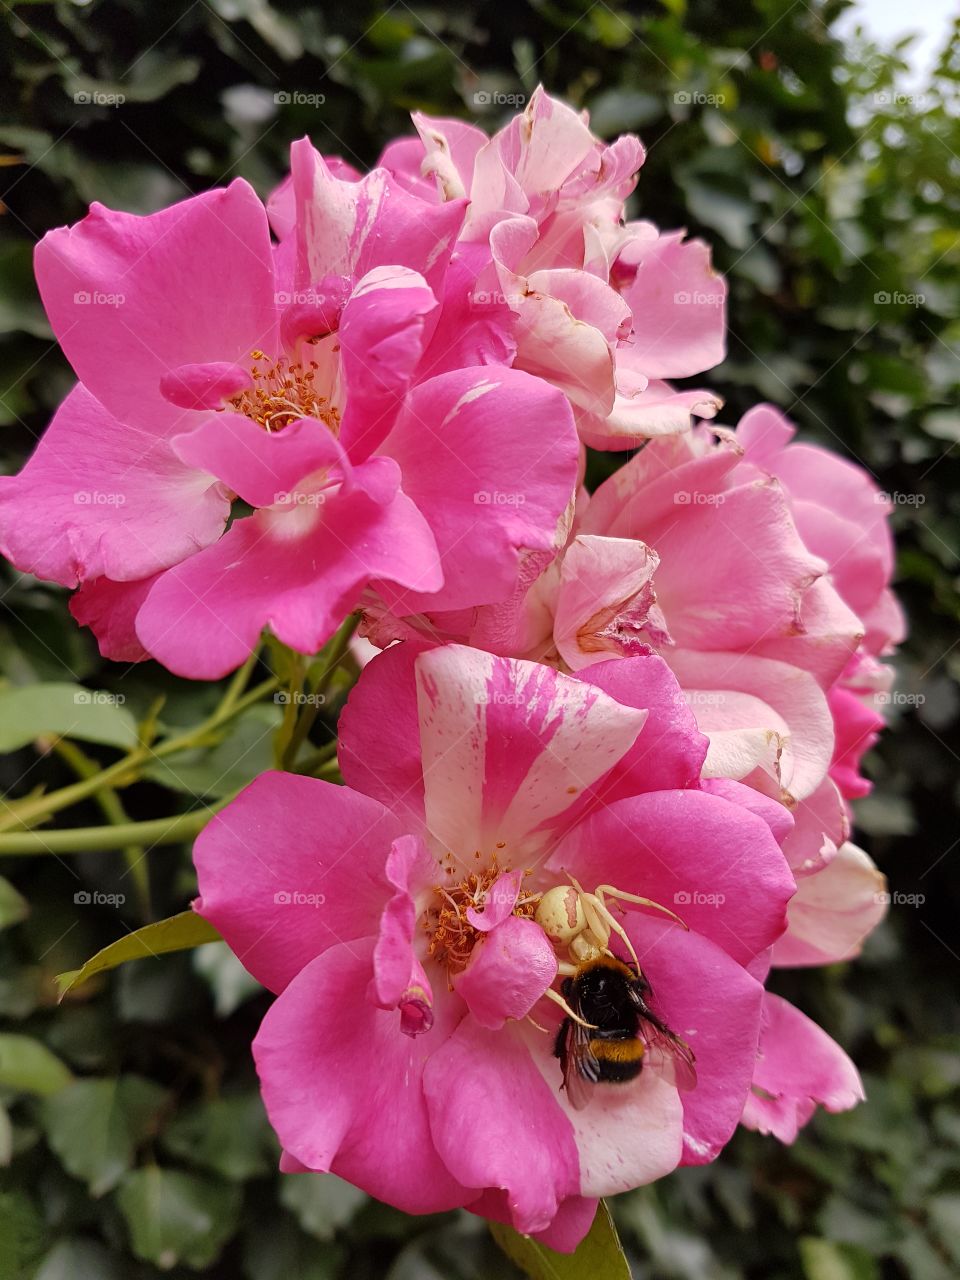 Roses, a spider eats a bee